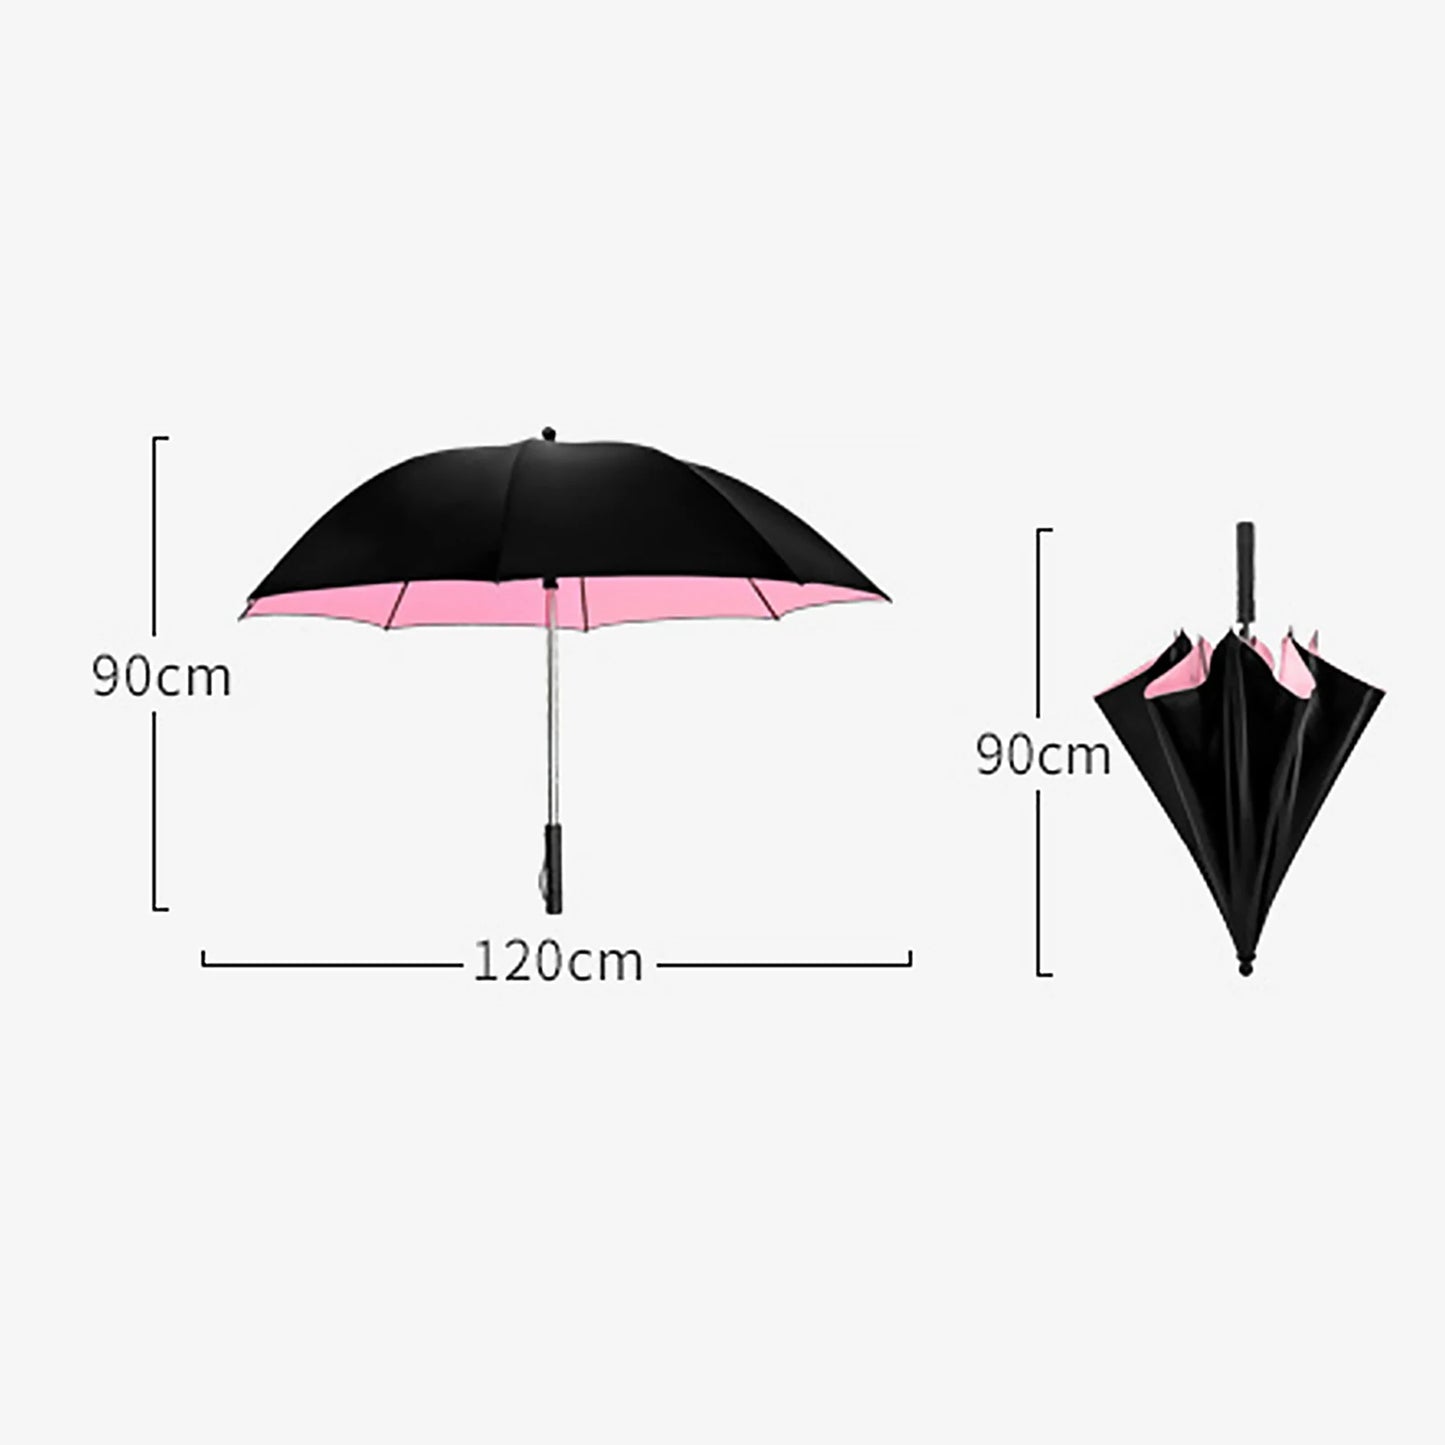 Portable umbrella with fan and safety isolation mesh, rechargeable battery, and wind-resistant design for outdoor use.